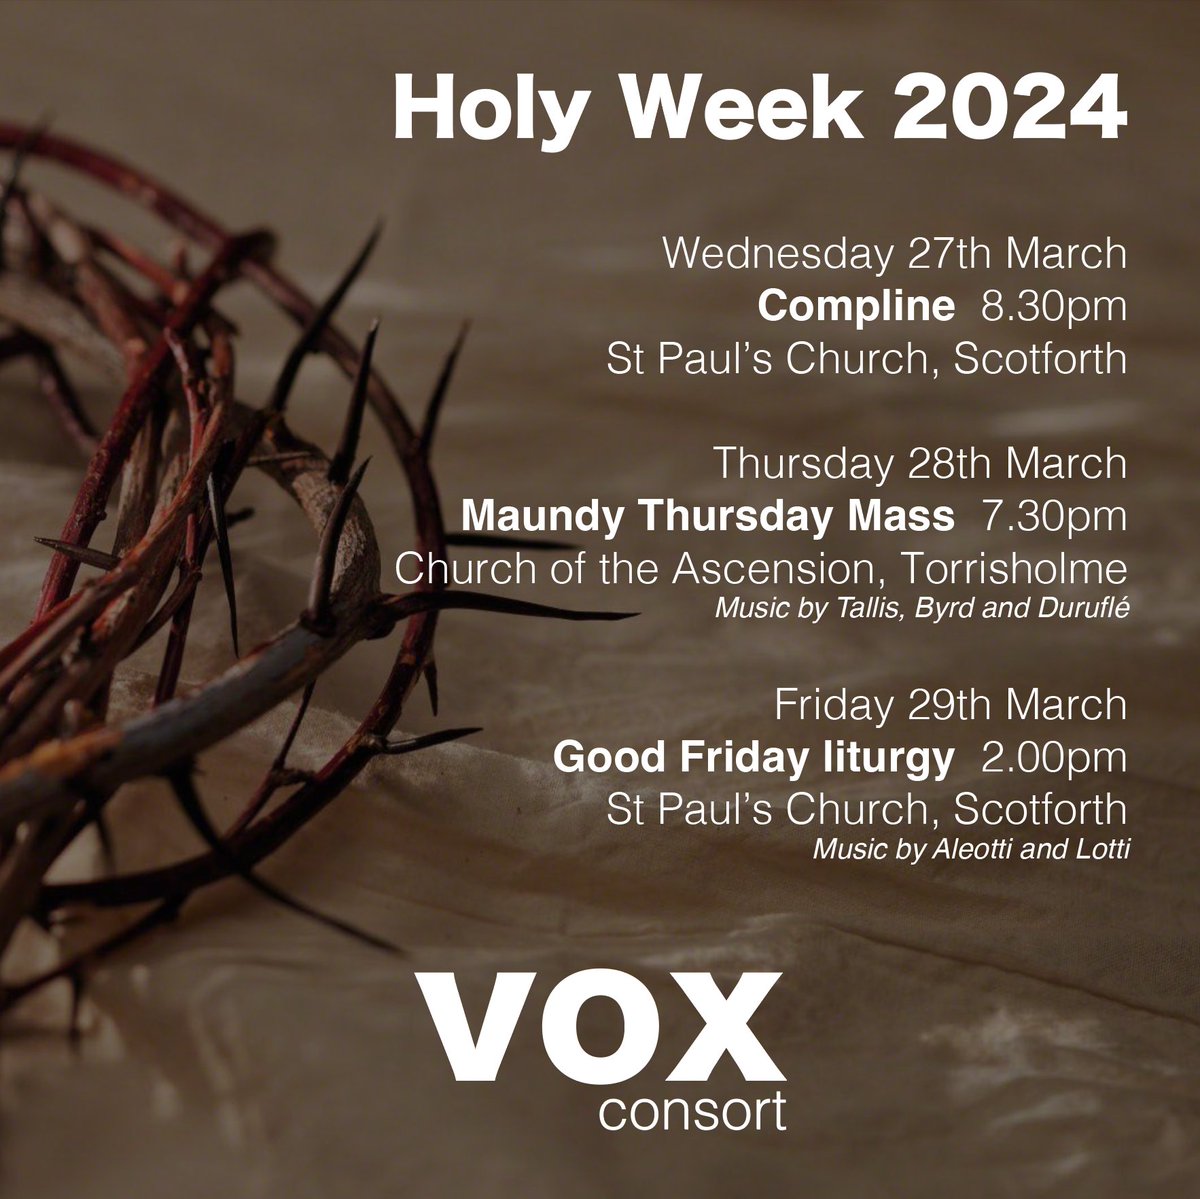 Following the success of our Carol Service in December, Vox Consort returns to the Lancaster area to lead reflective services for Holy Week. Do join us, if you are able to do so.